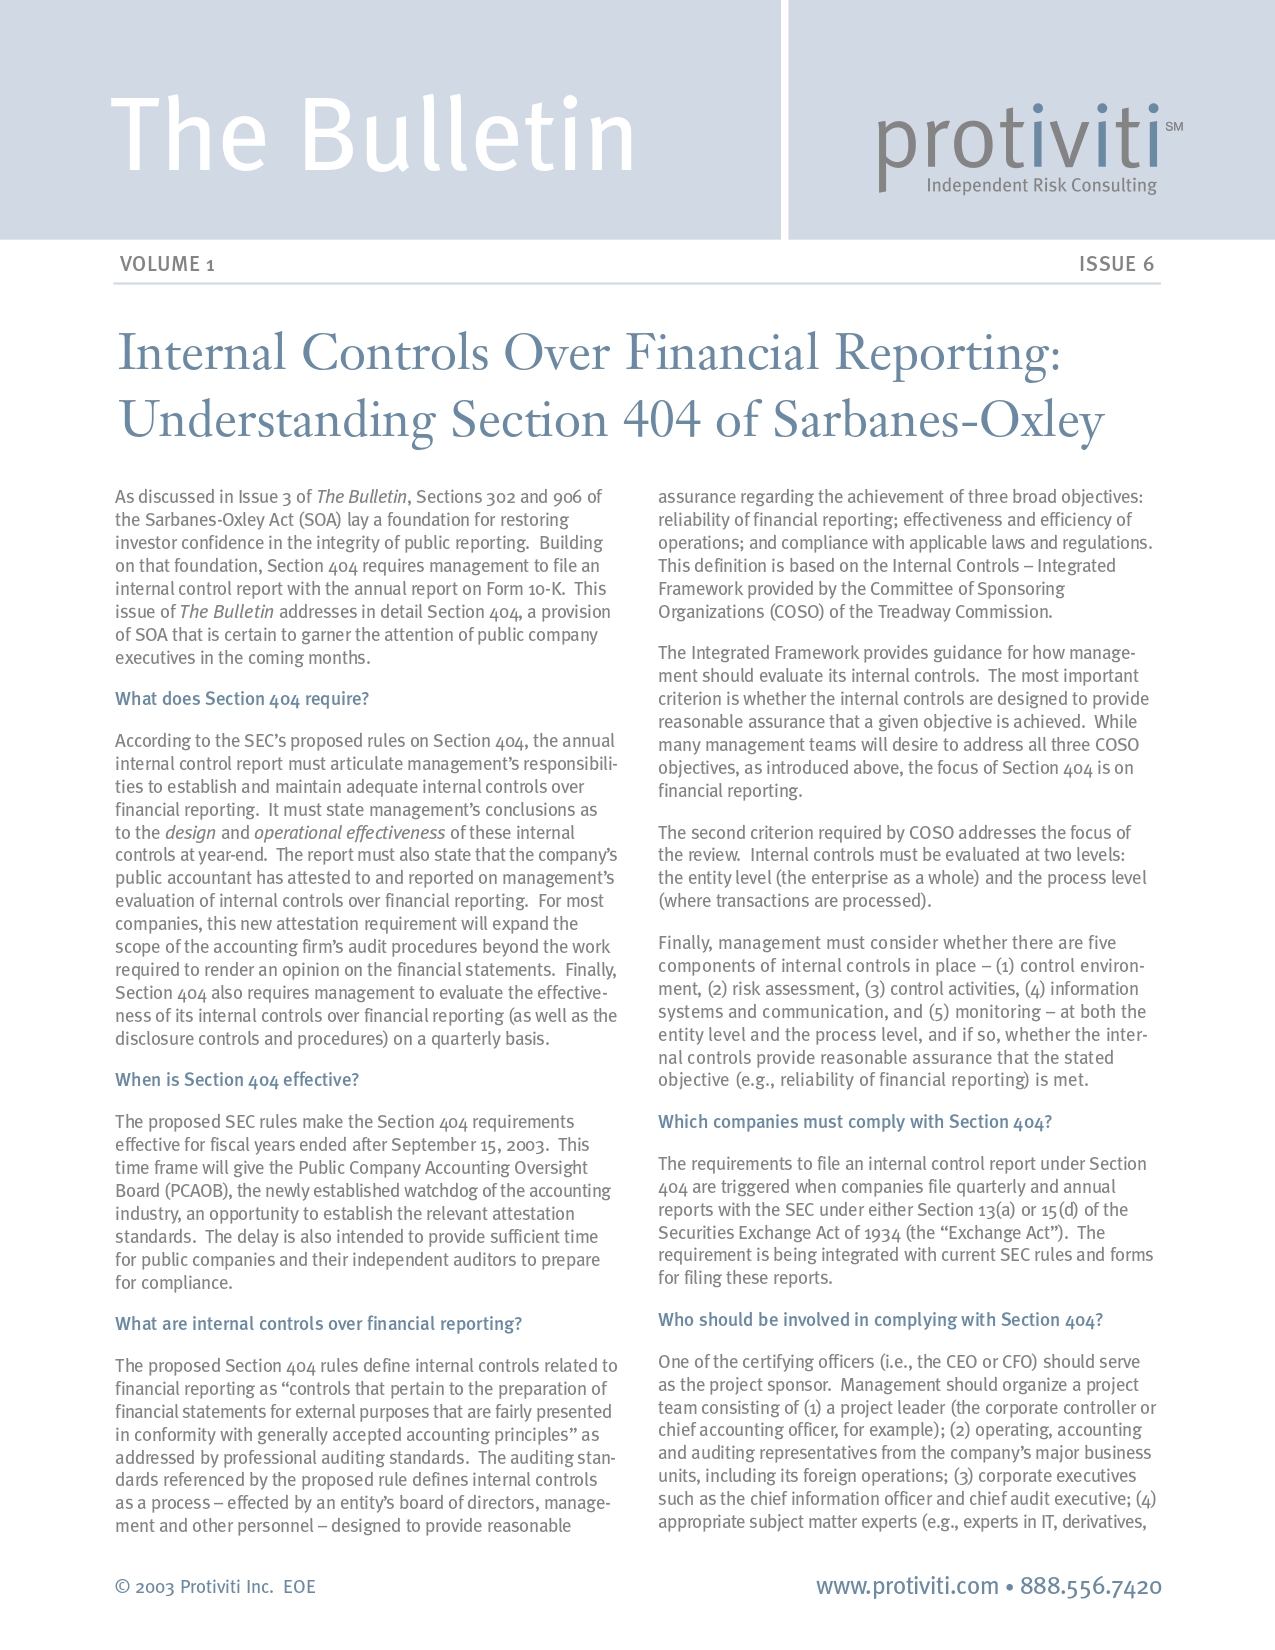 Screenshot of the first page of Internal Controls Over Financial Reporting - Understanding Section 404 of Sarbanes-Oxley